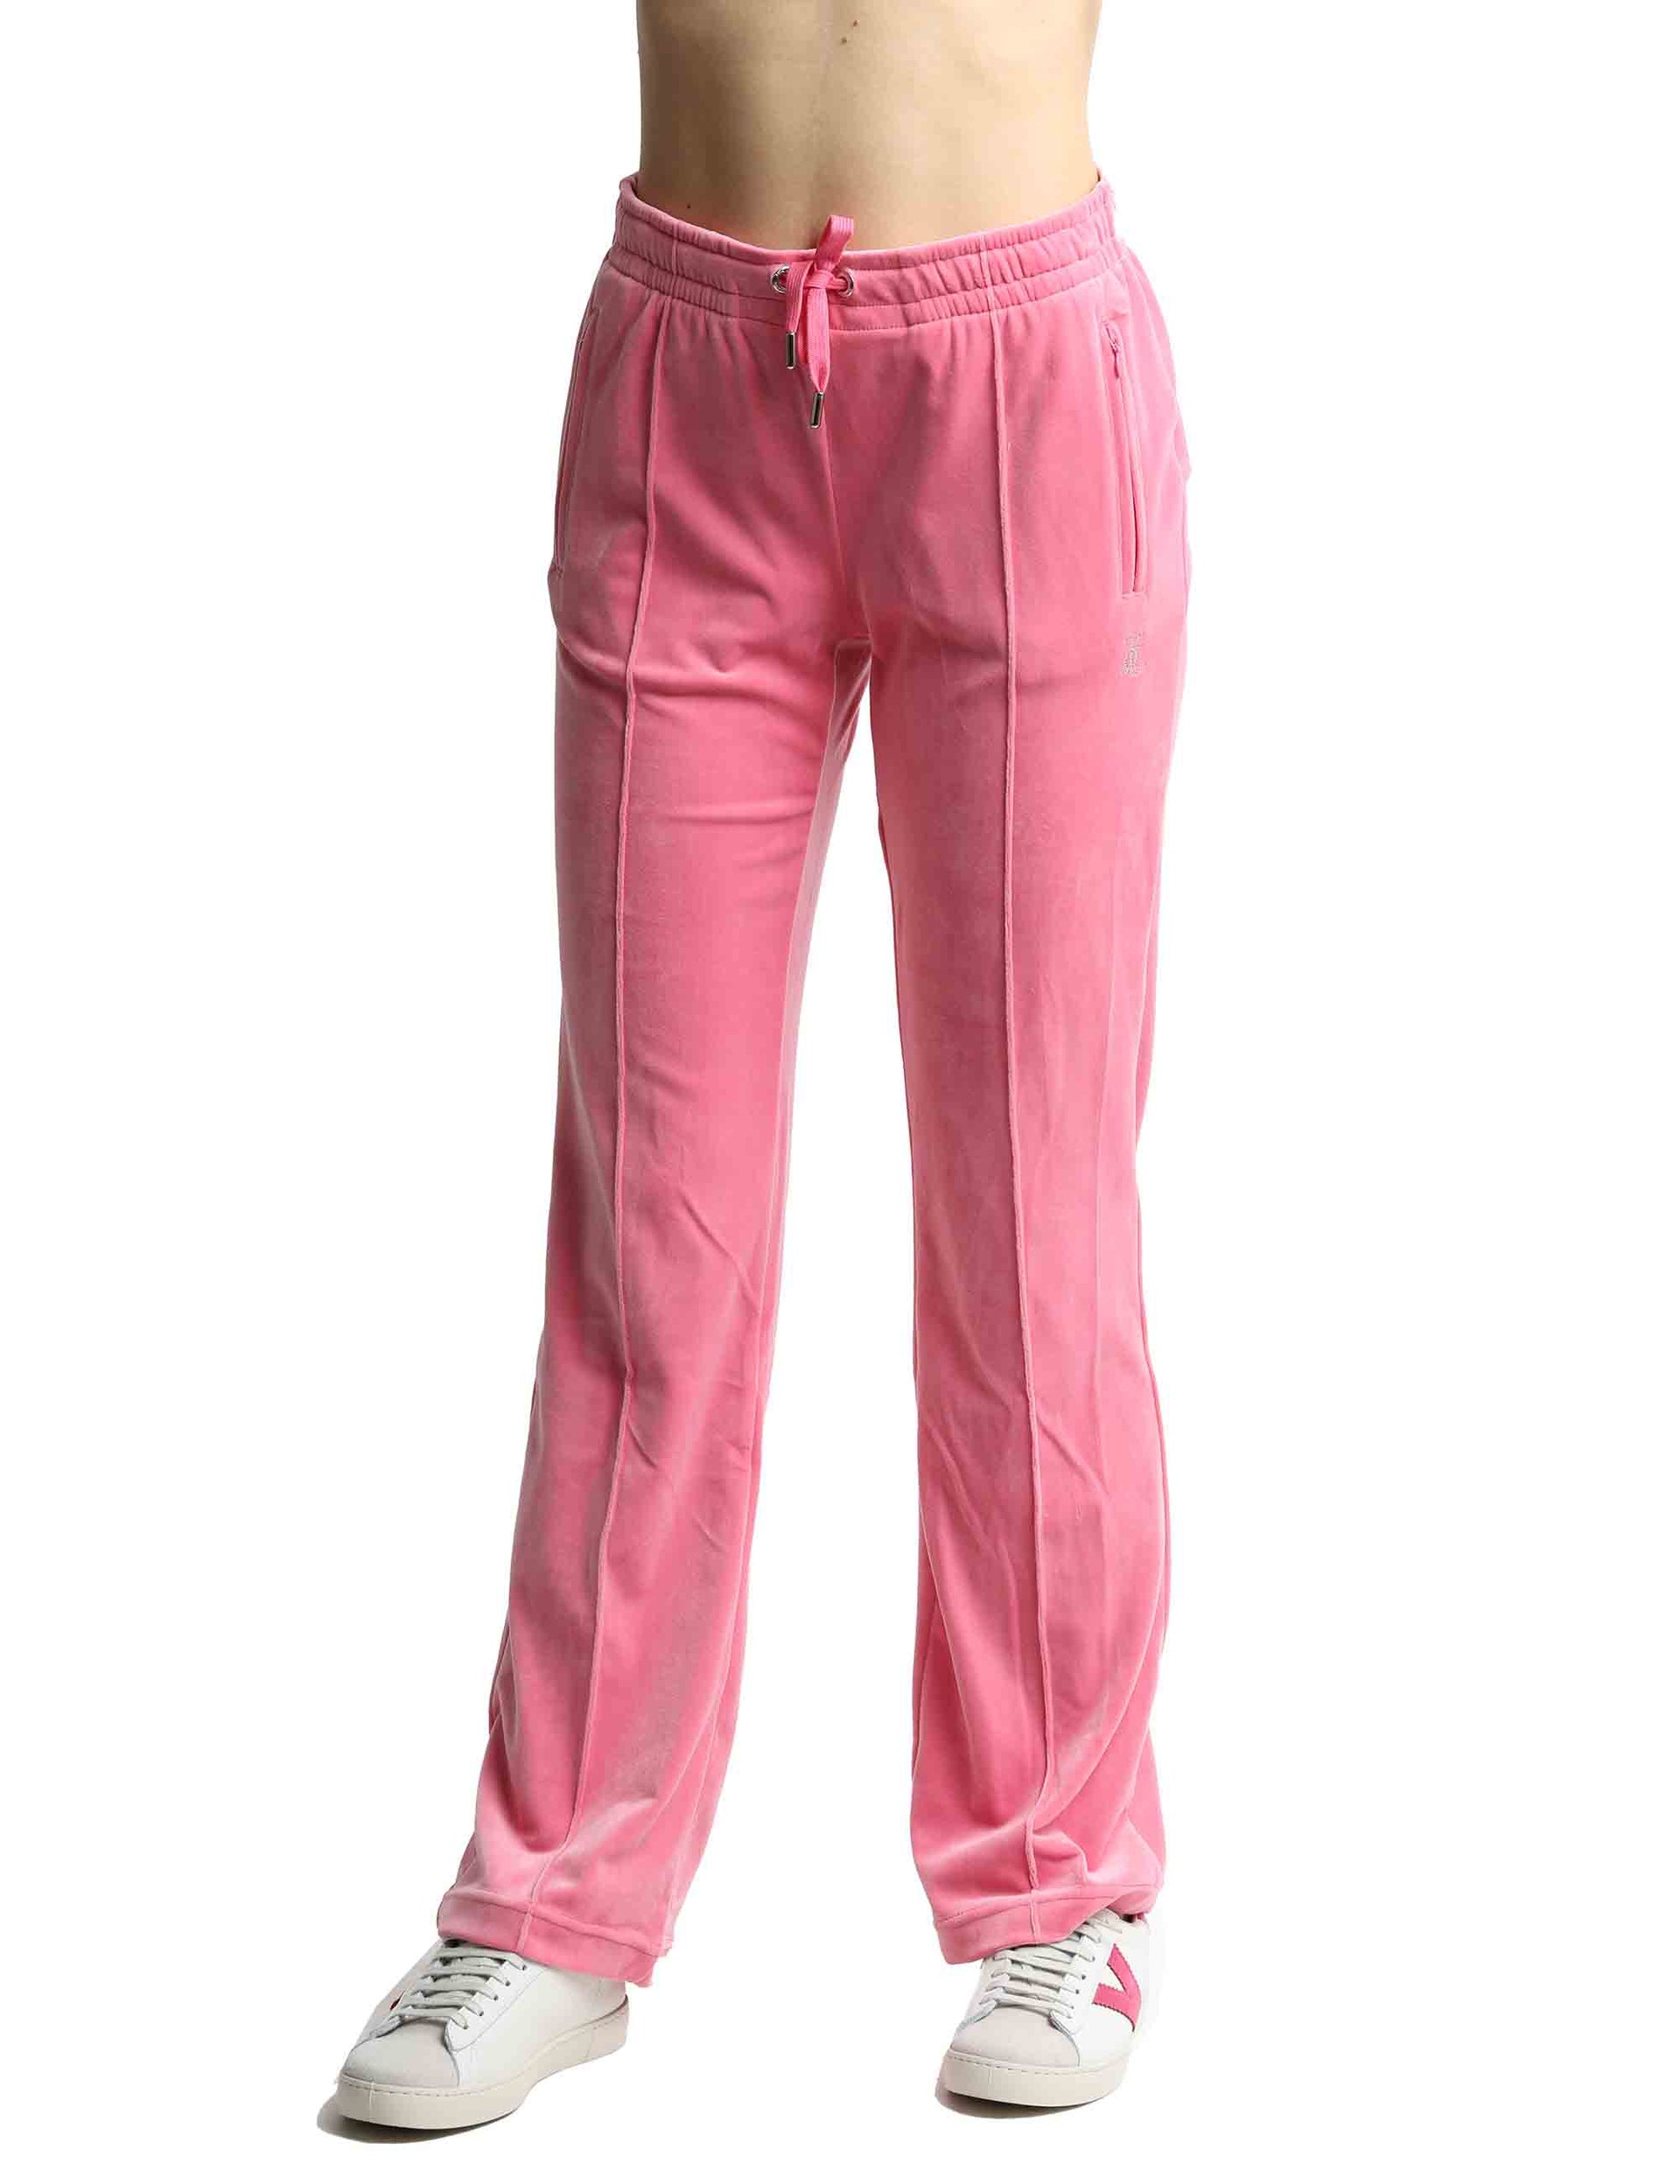 Tina women's tracksuit trousers in pink fabric with rhinestones